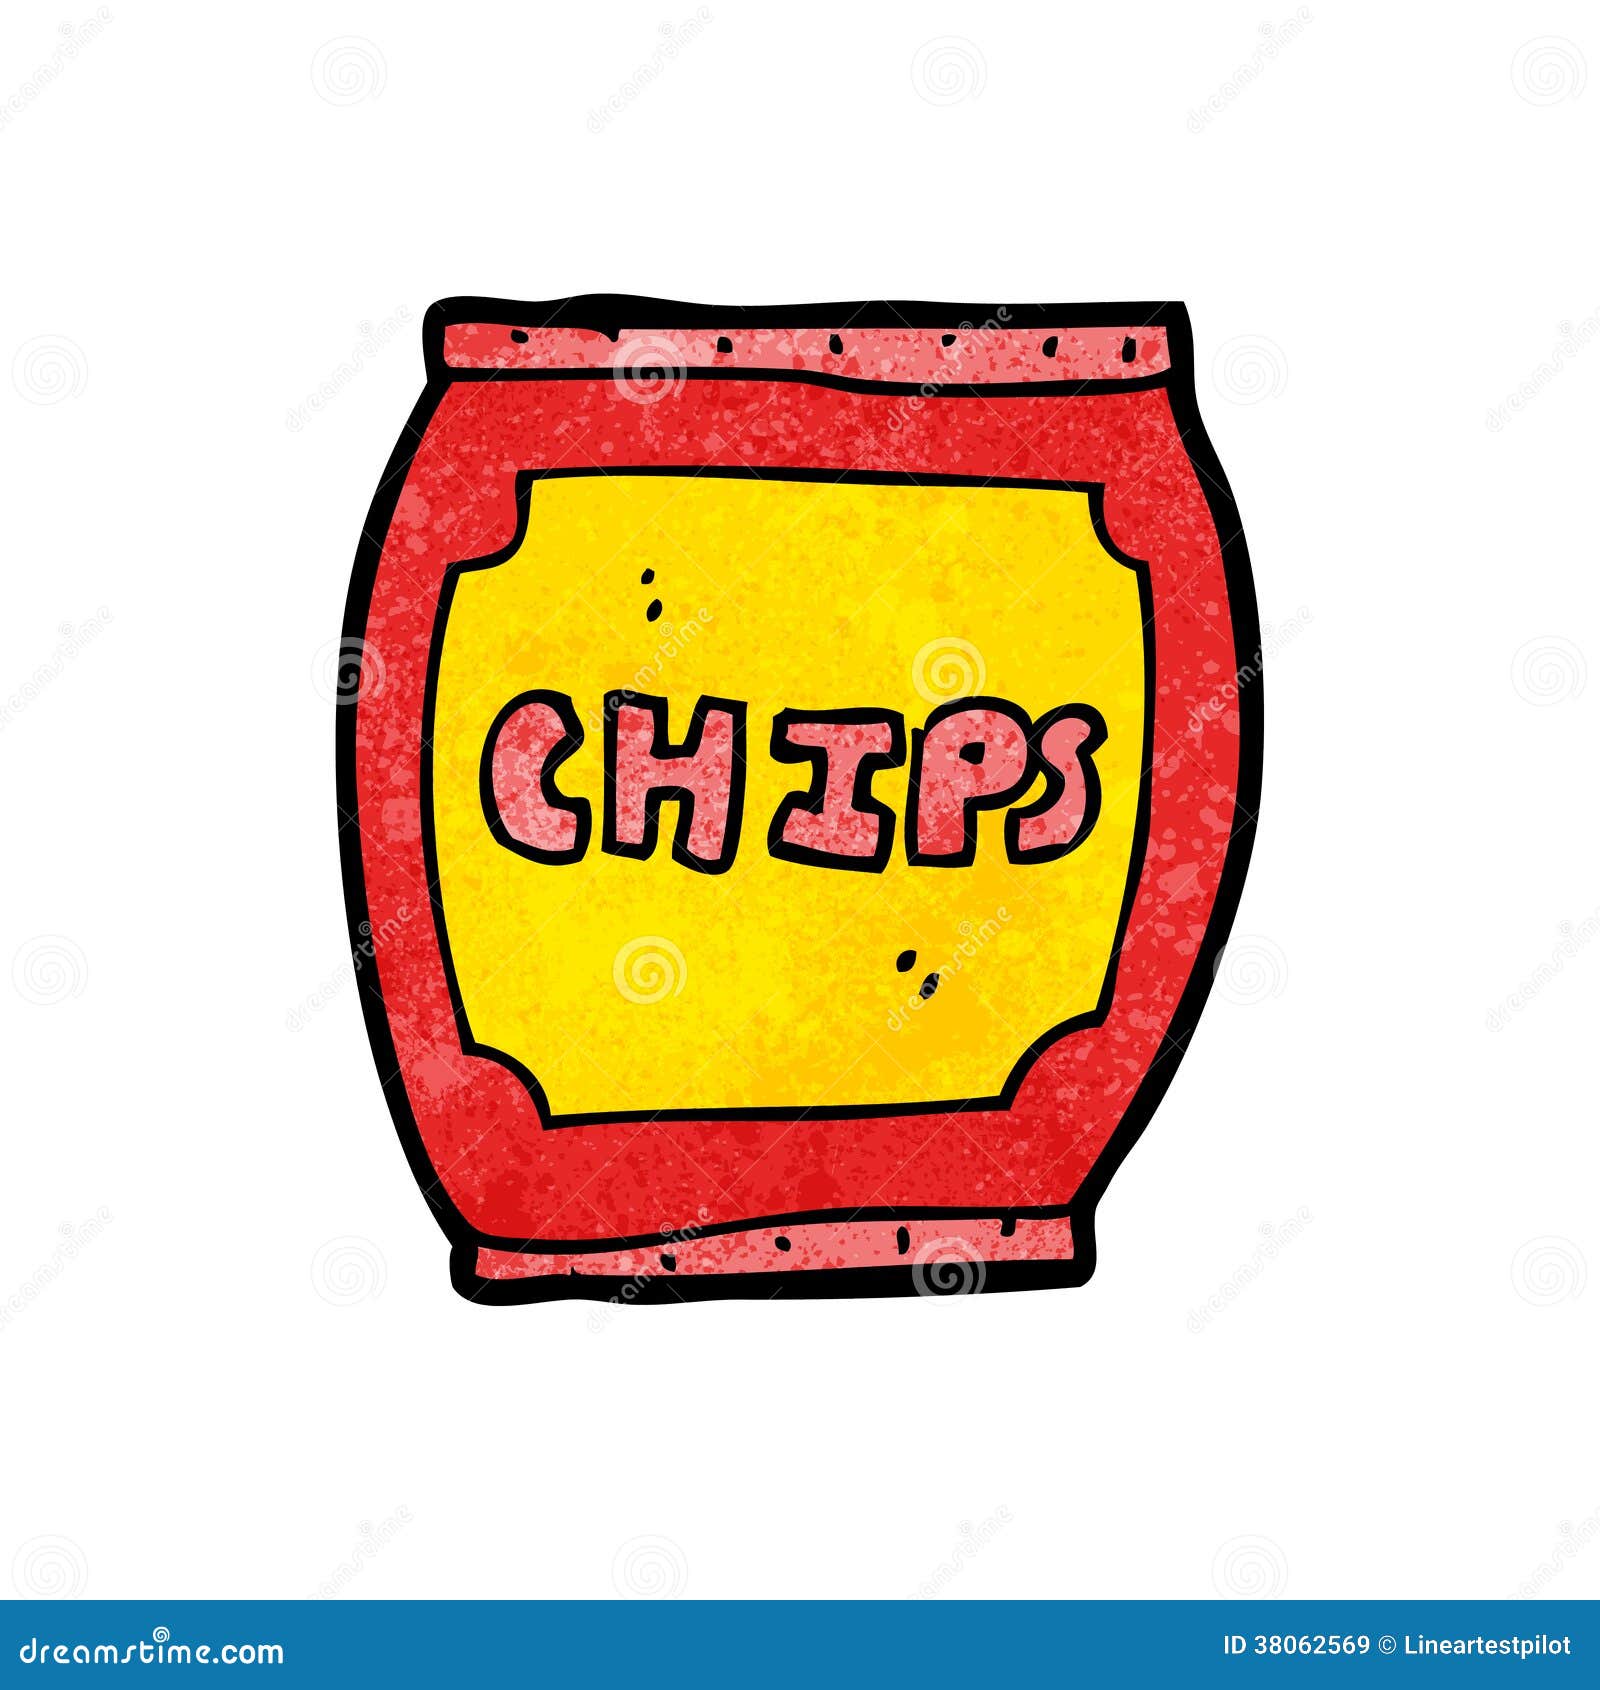 bag of chips clipart - photo #33